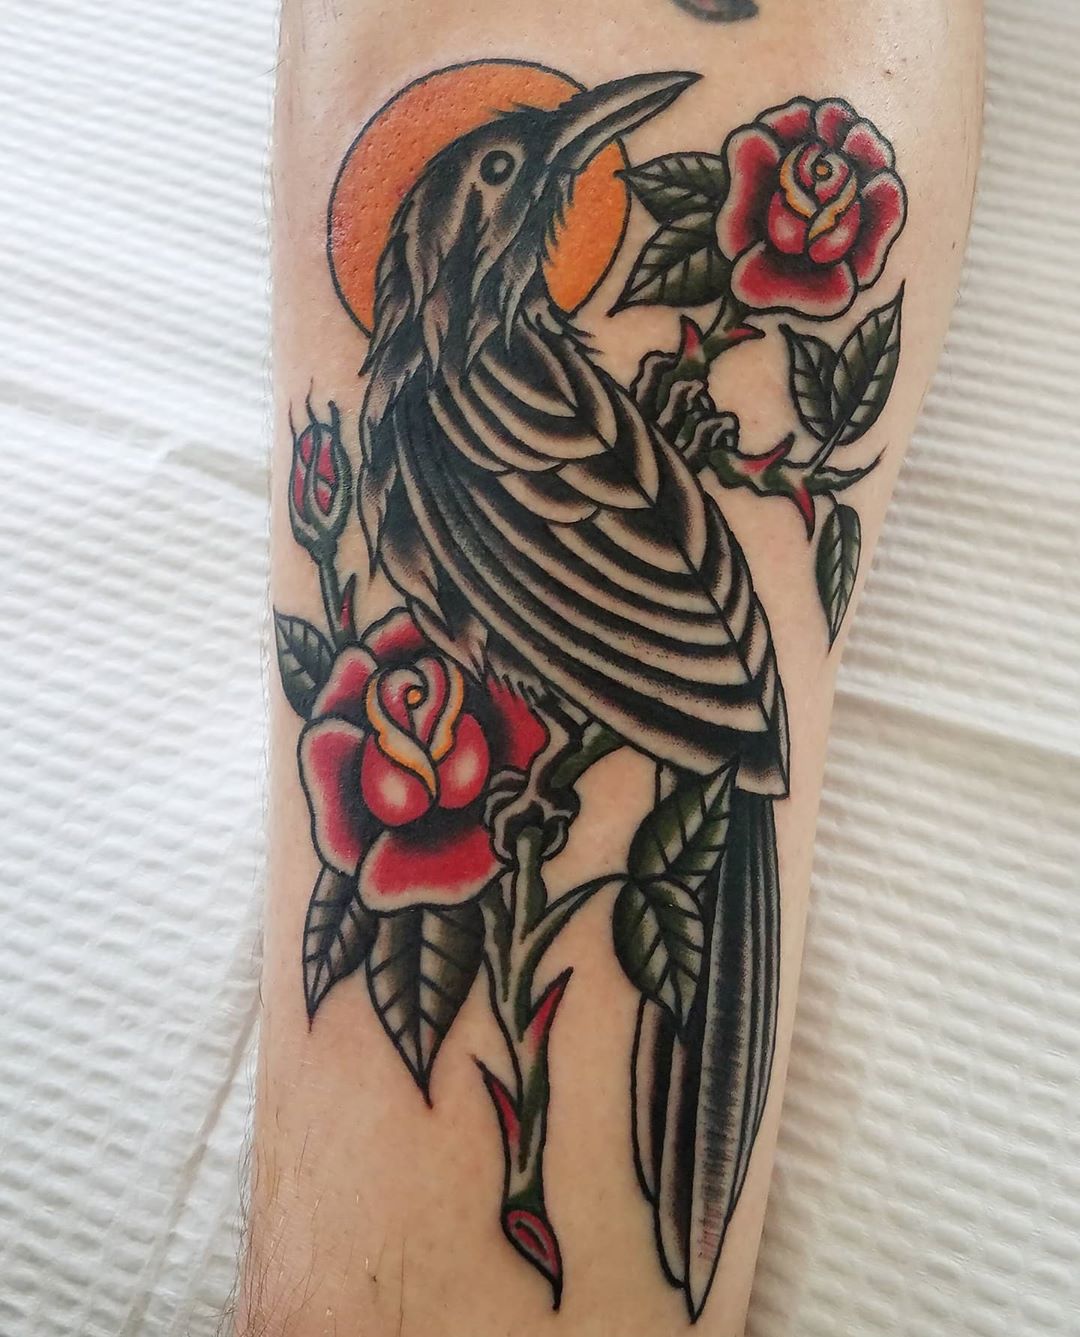 Raven Tattoo 30 Images That Will Prove This Bird Is Way Cooler Than You  Think